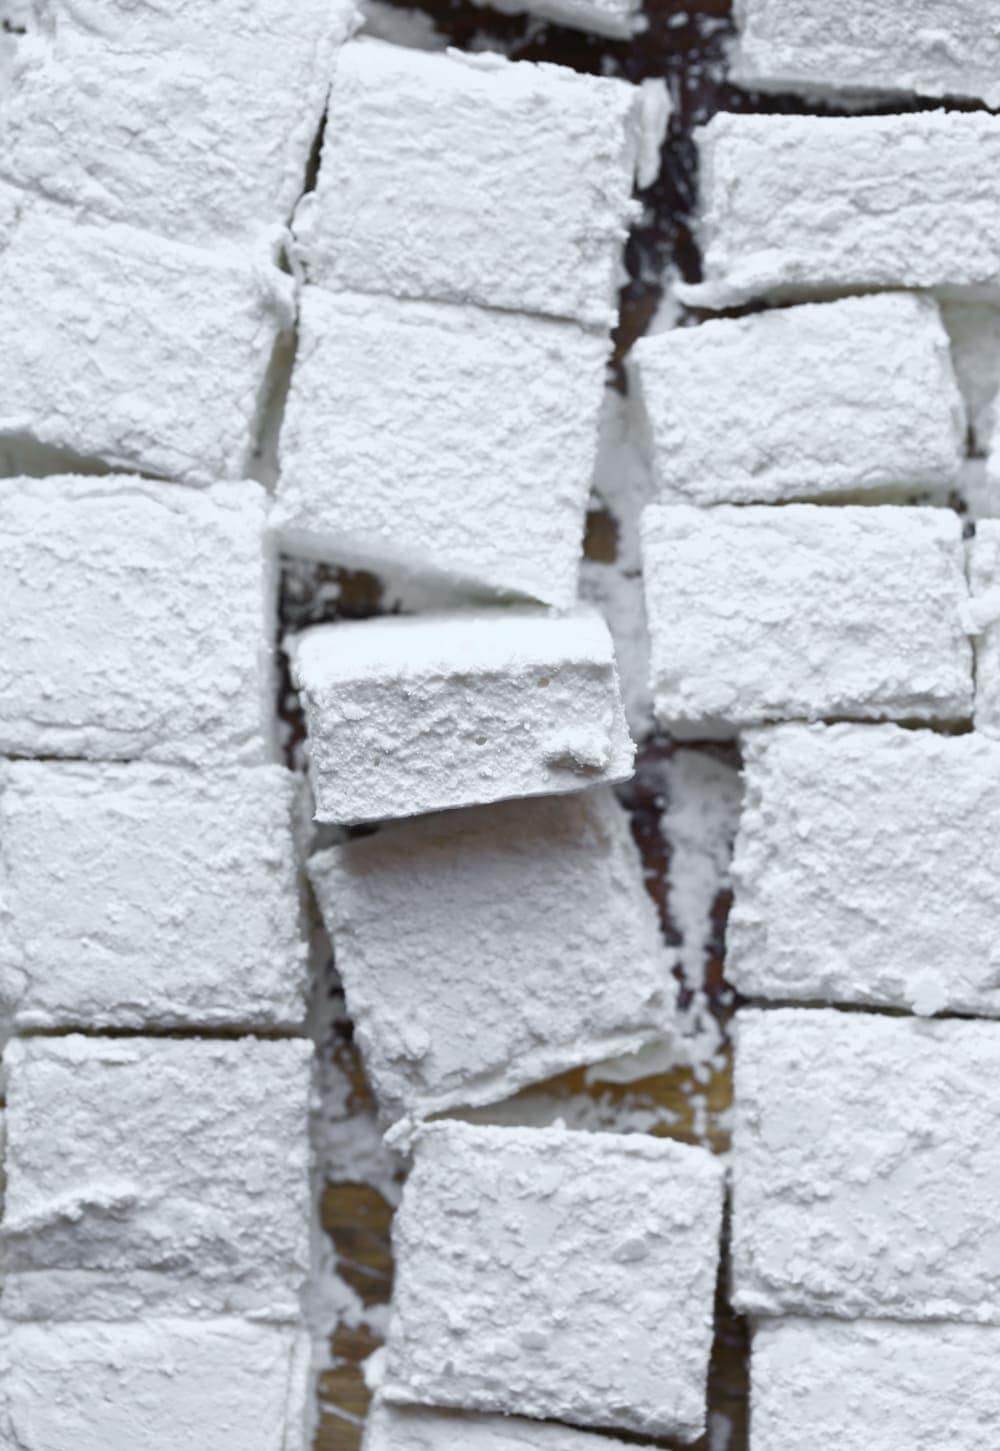 A Bunch of Square Homemade Marshmallows on a Wooden Surface